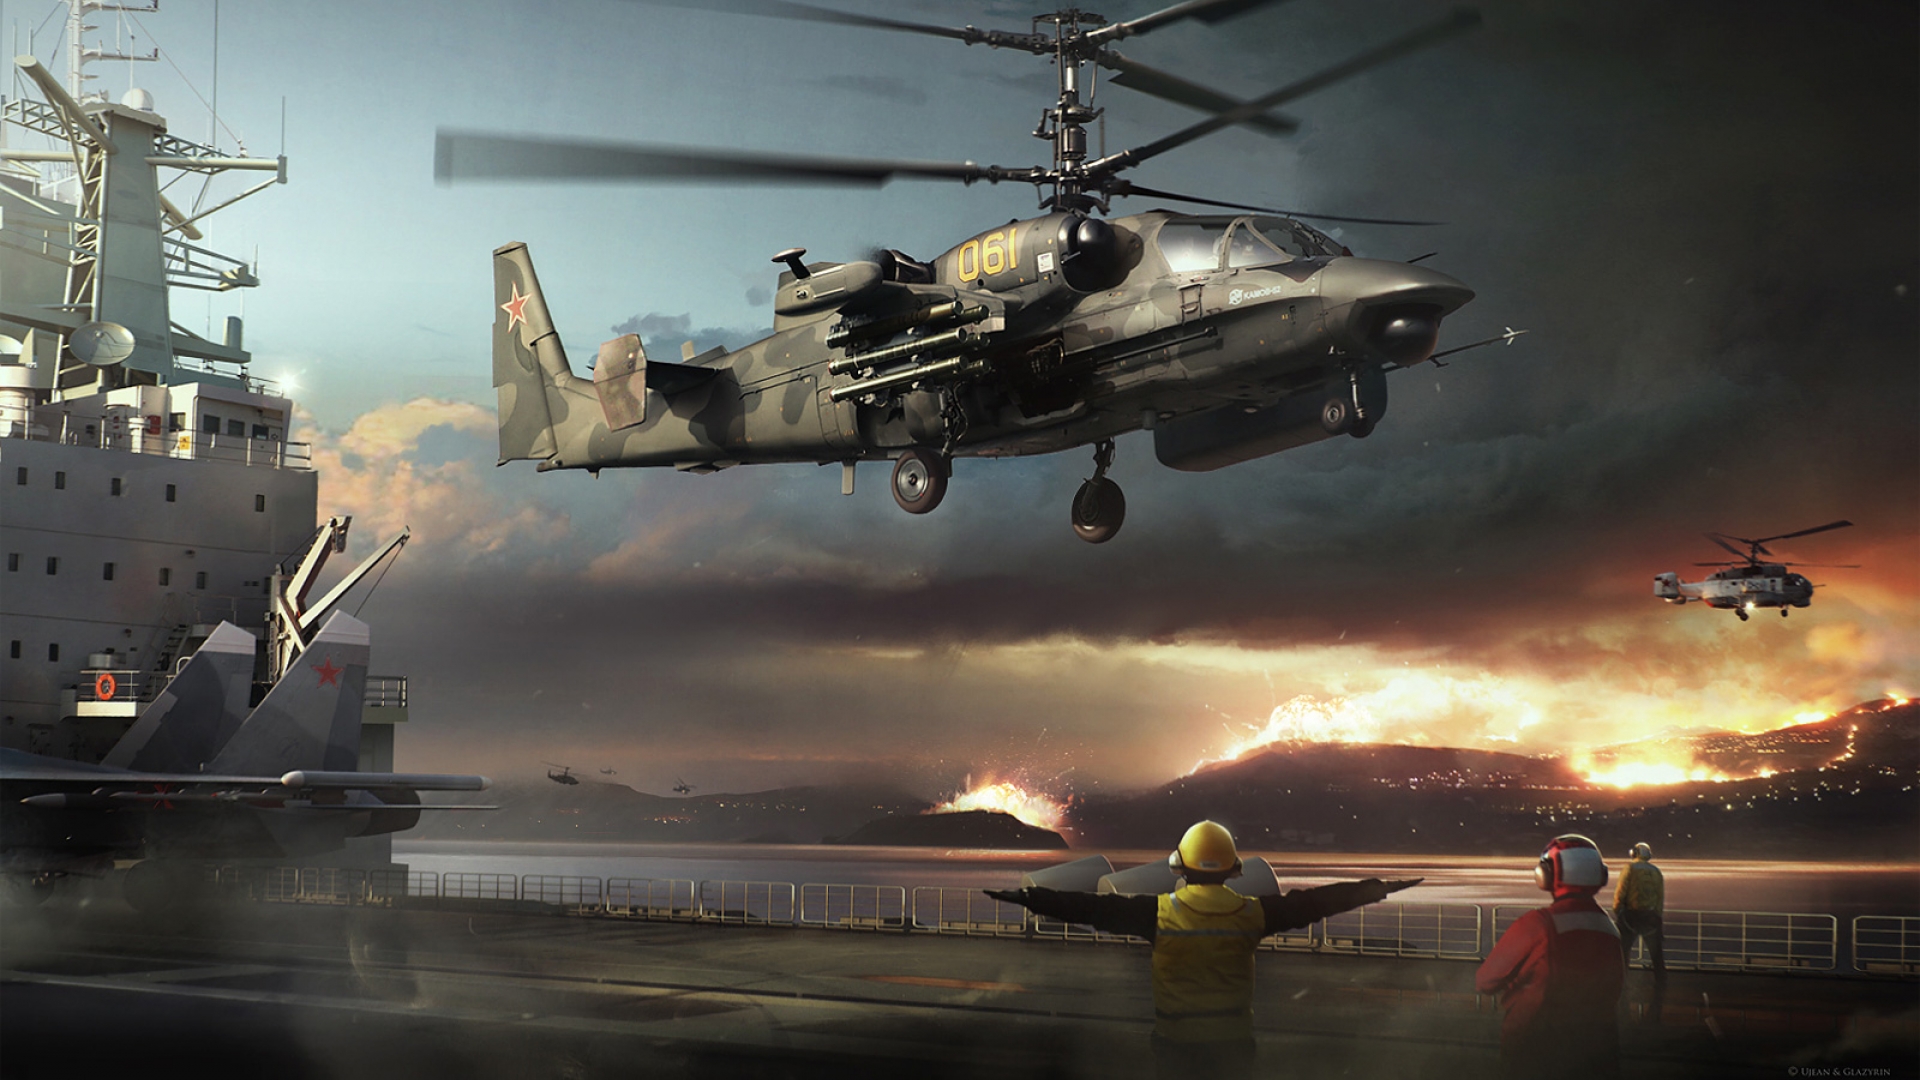 Attack Helicopter Wallpaper